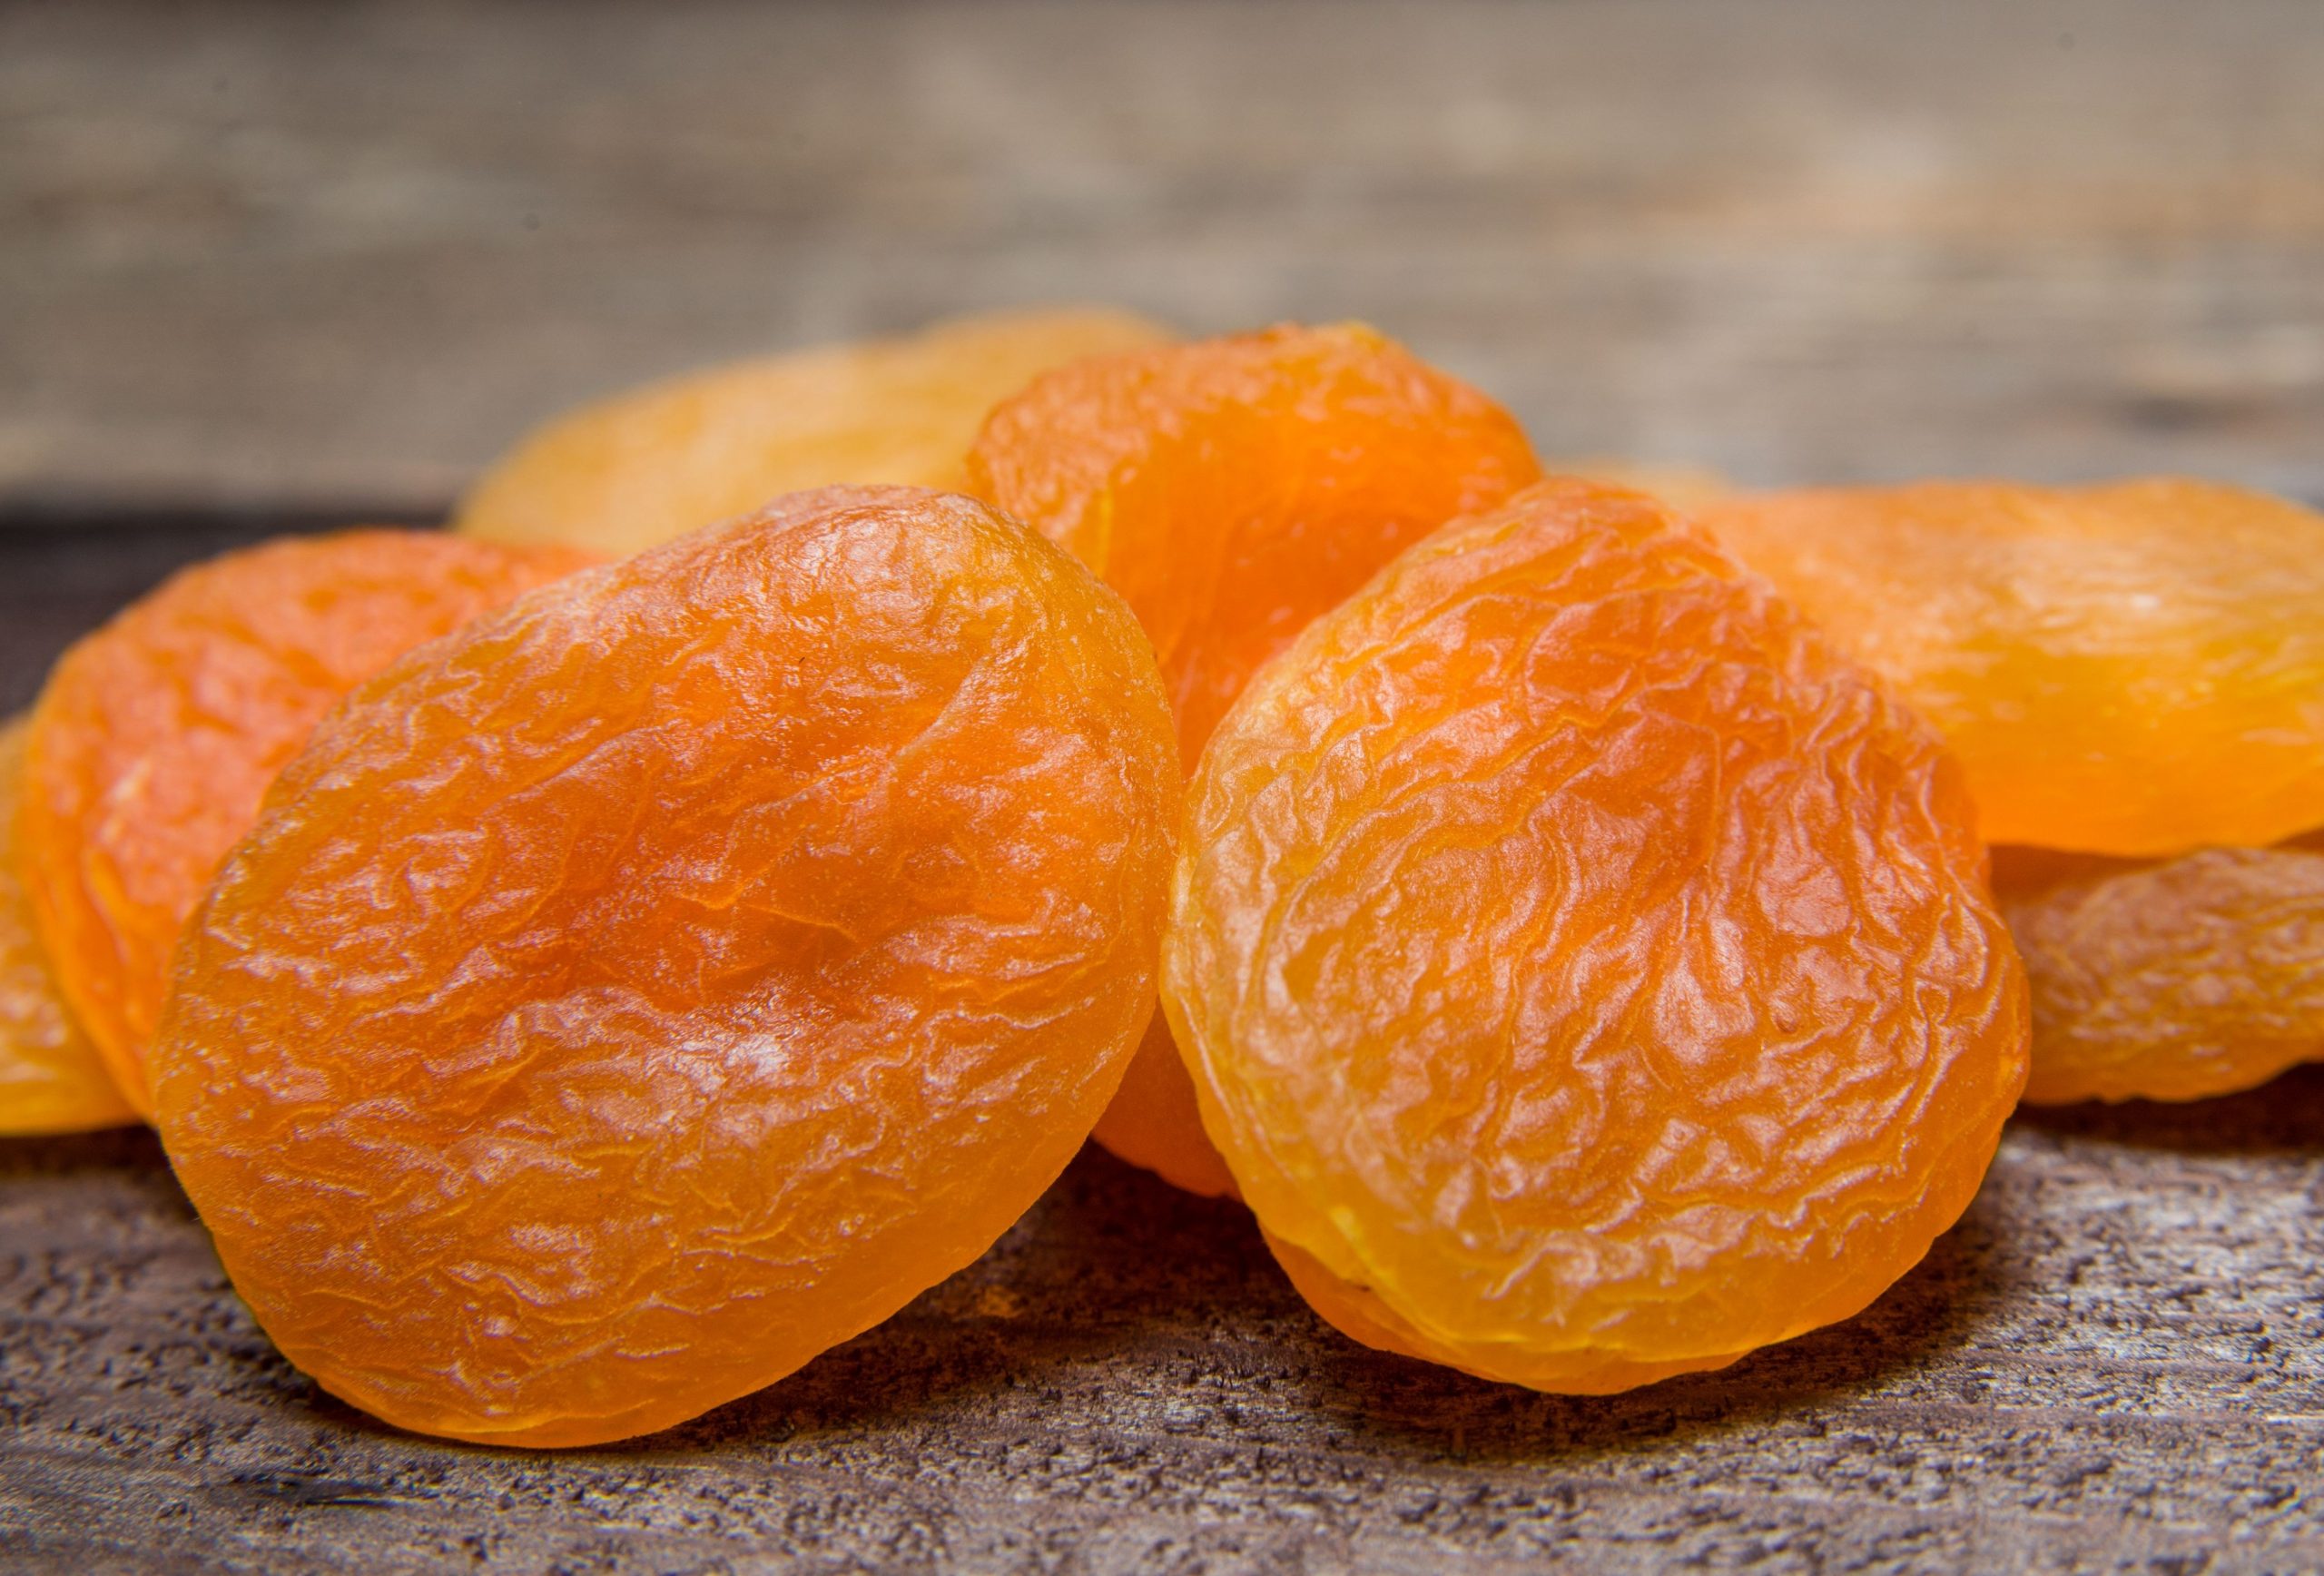 Producers and Exporters of Dried Apricots in Iran _ Nutex Company